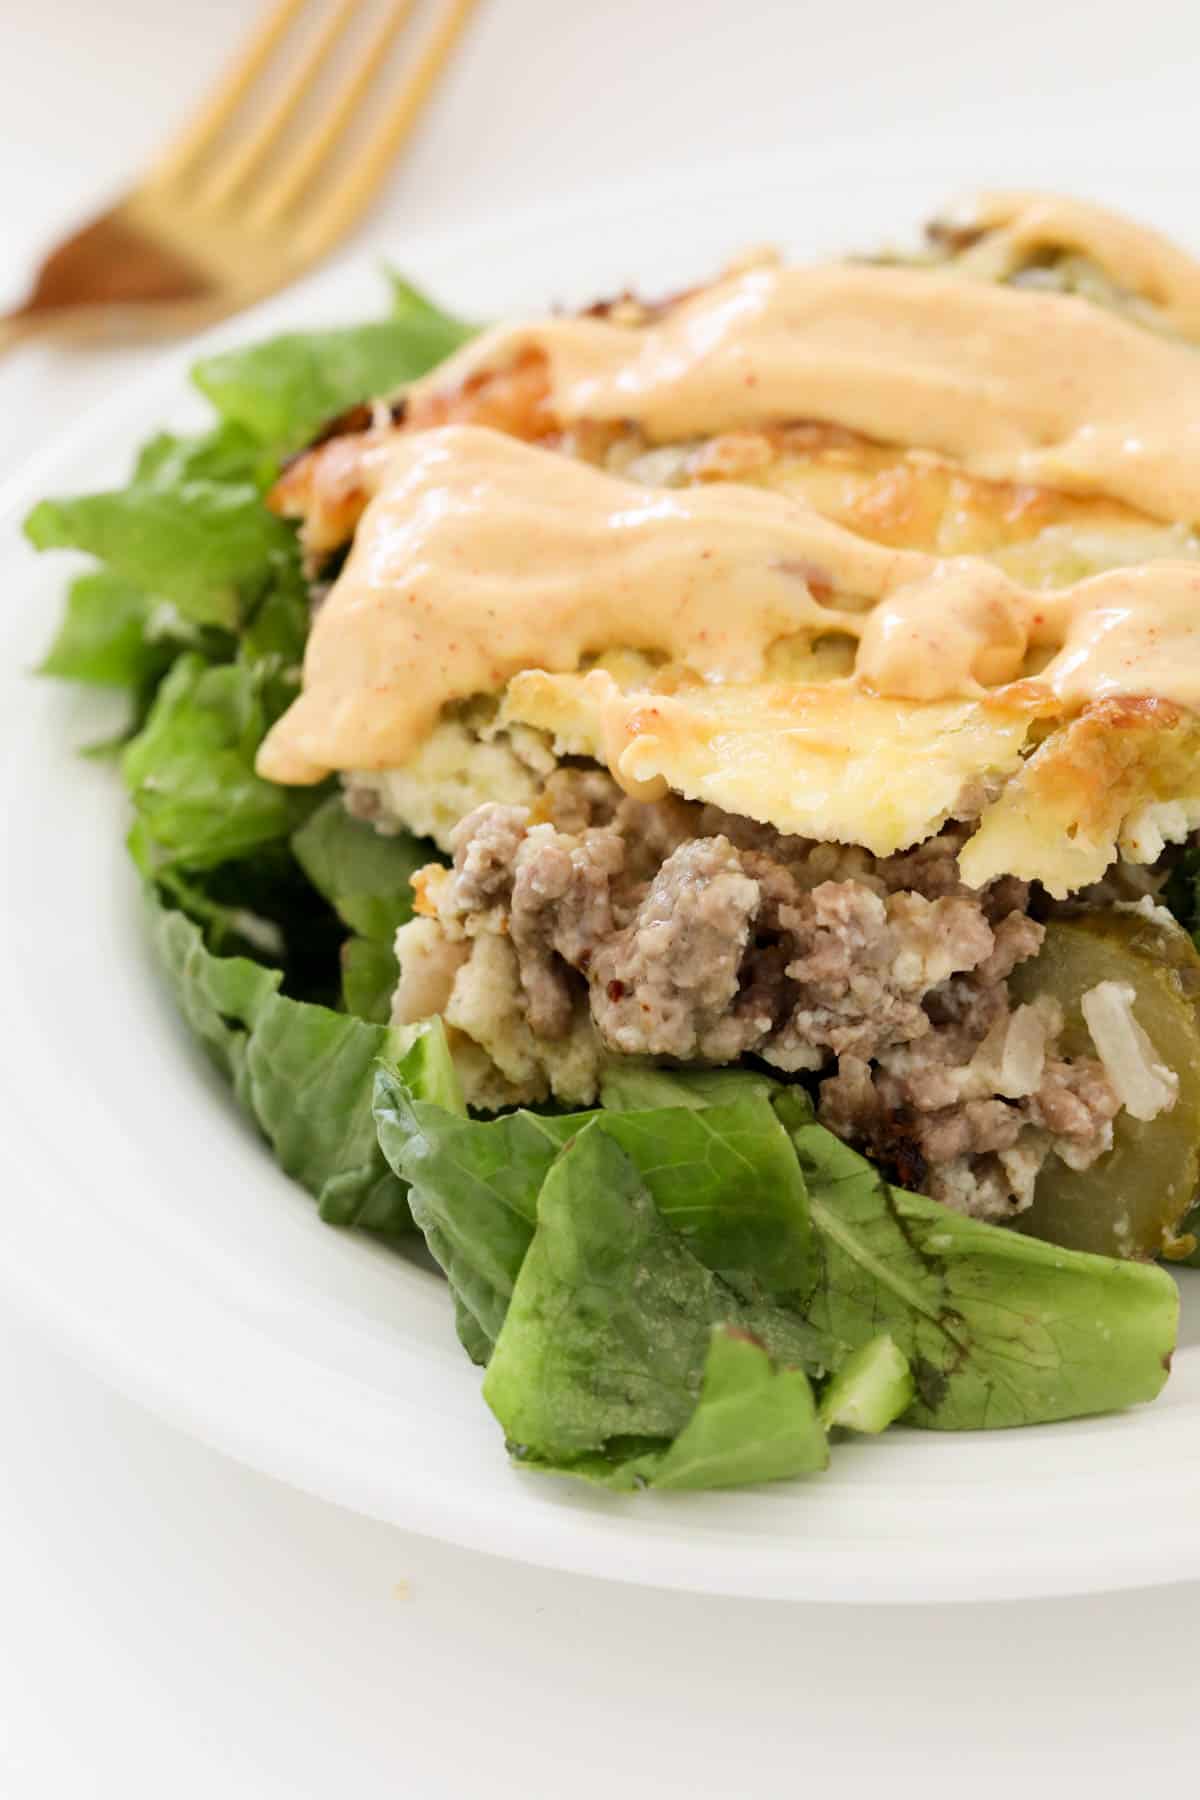 A low carb beef casserole with cheese, lettuce and burger sauce.